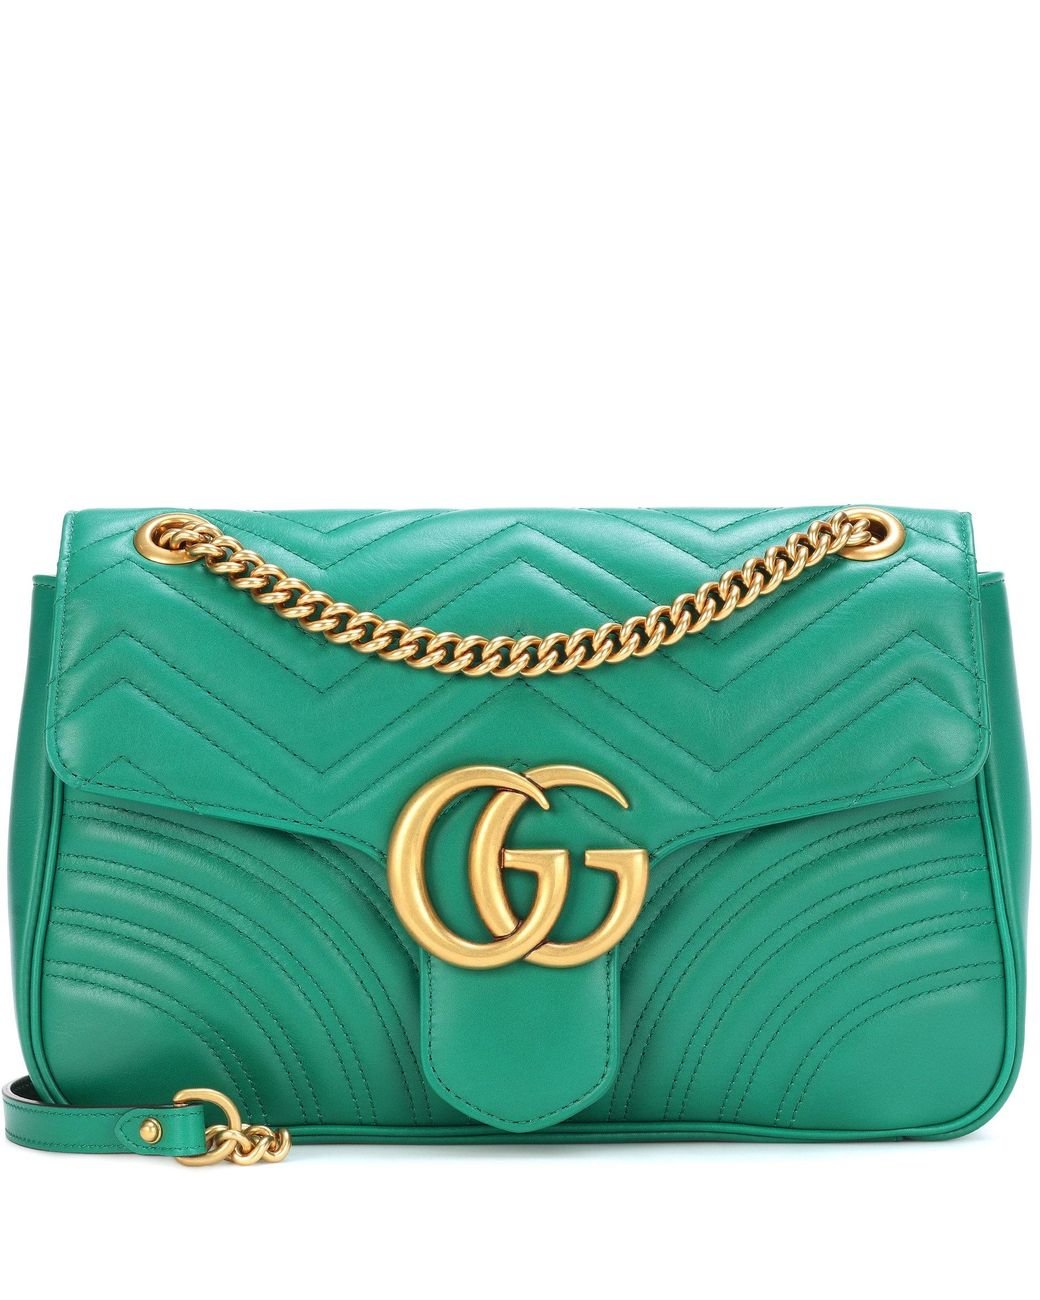 Gucci Marmont Medium Leather Shoulder Bag in Green | Lyst